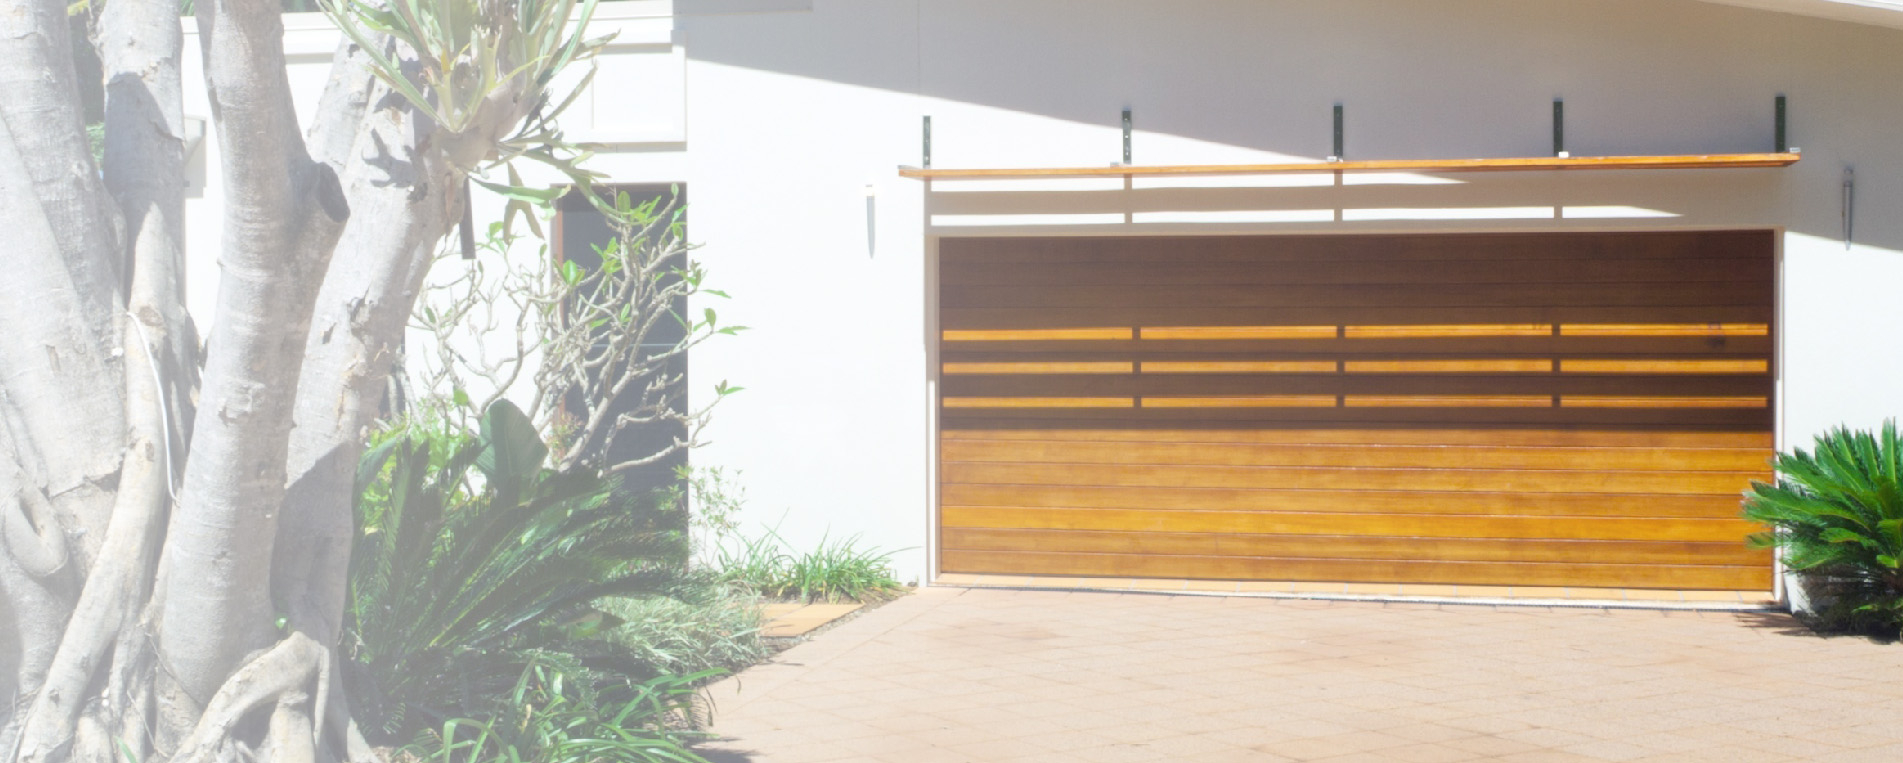 Fast Sunnyvale Repair Services For Garage Doors